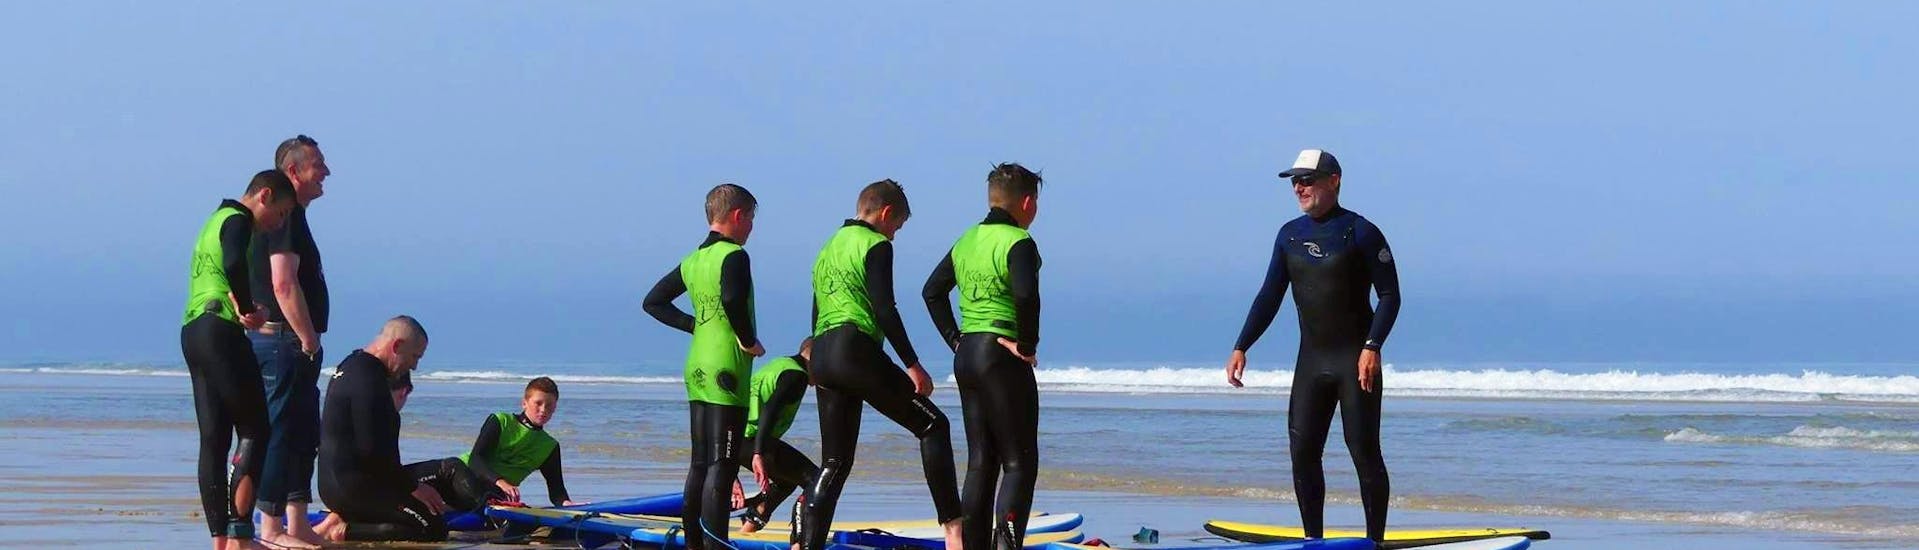 Surfers are getting ready for their Surfing Lessons "Family Package" on Messanges South Beach with Messanges Surf School.